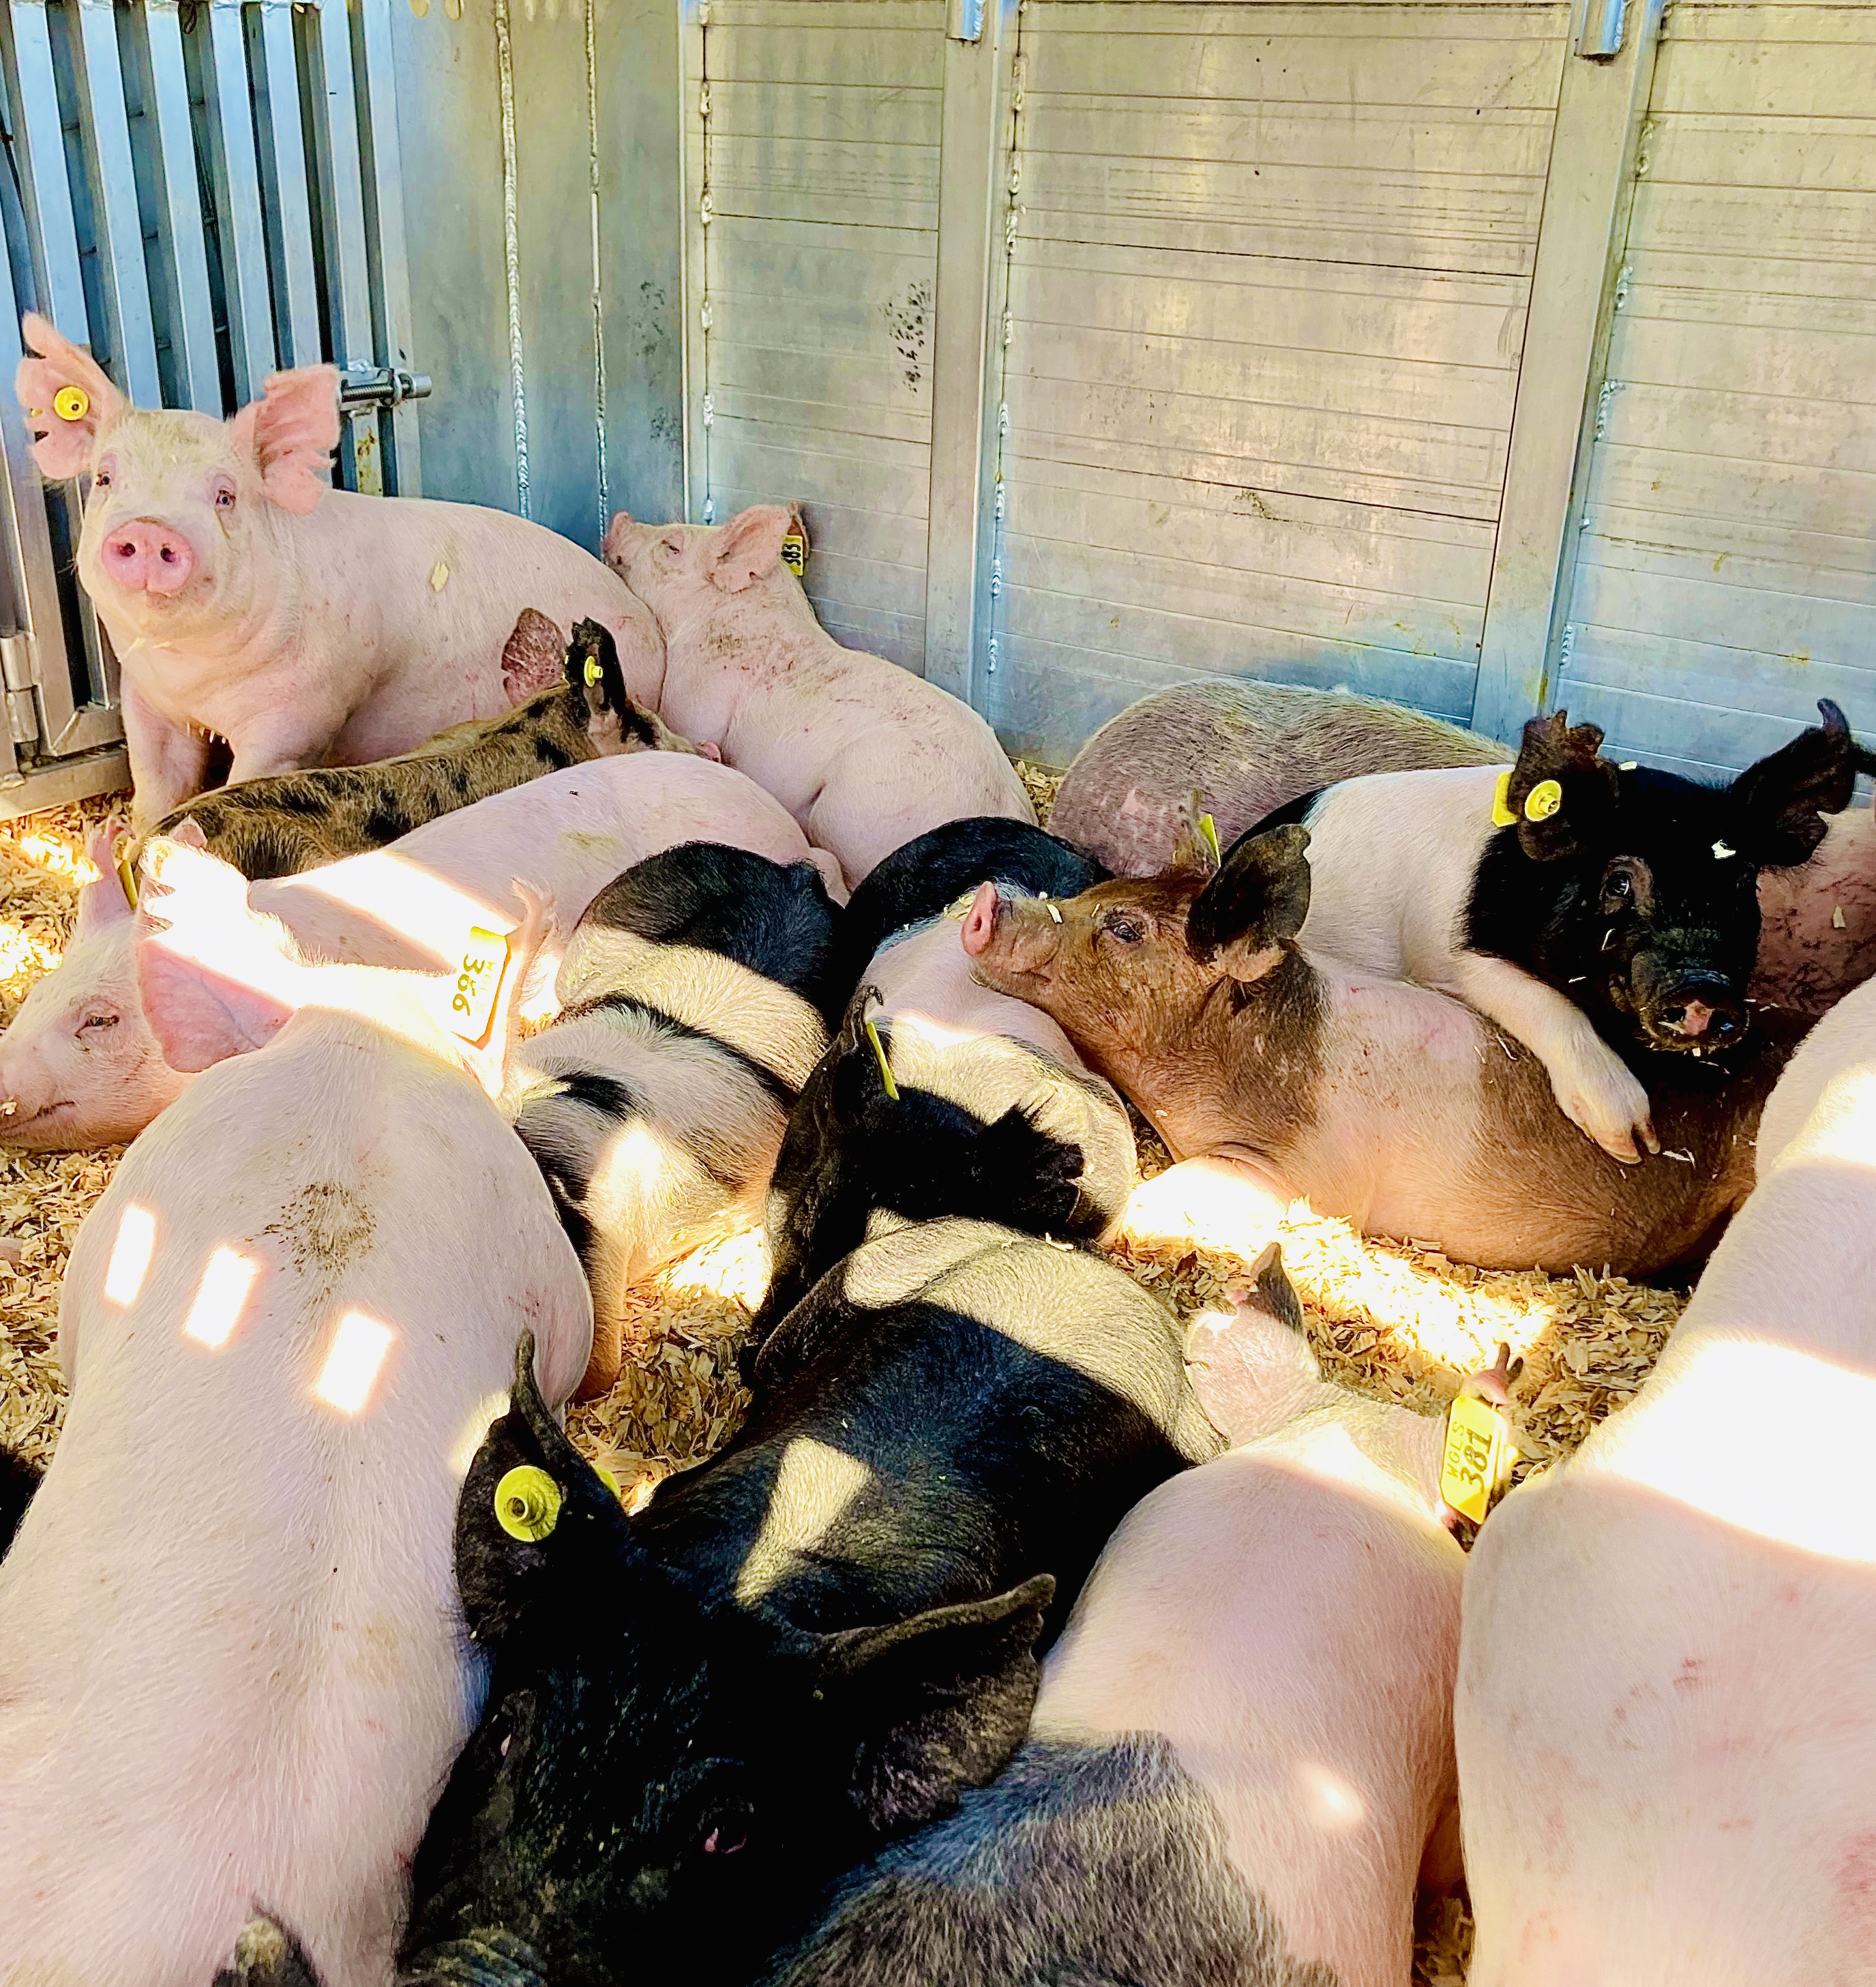 Pigs waiting for sorting